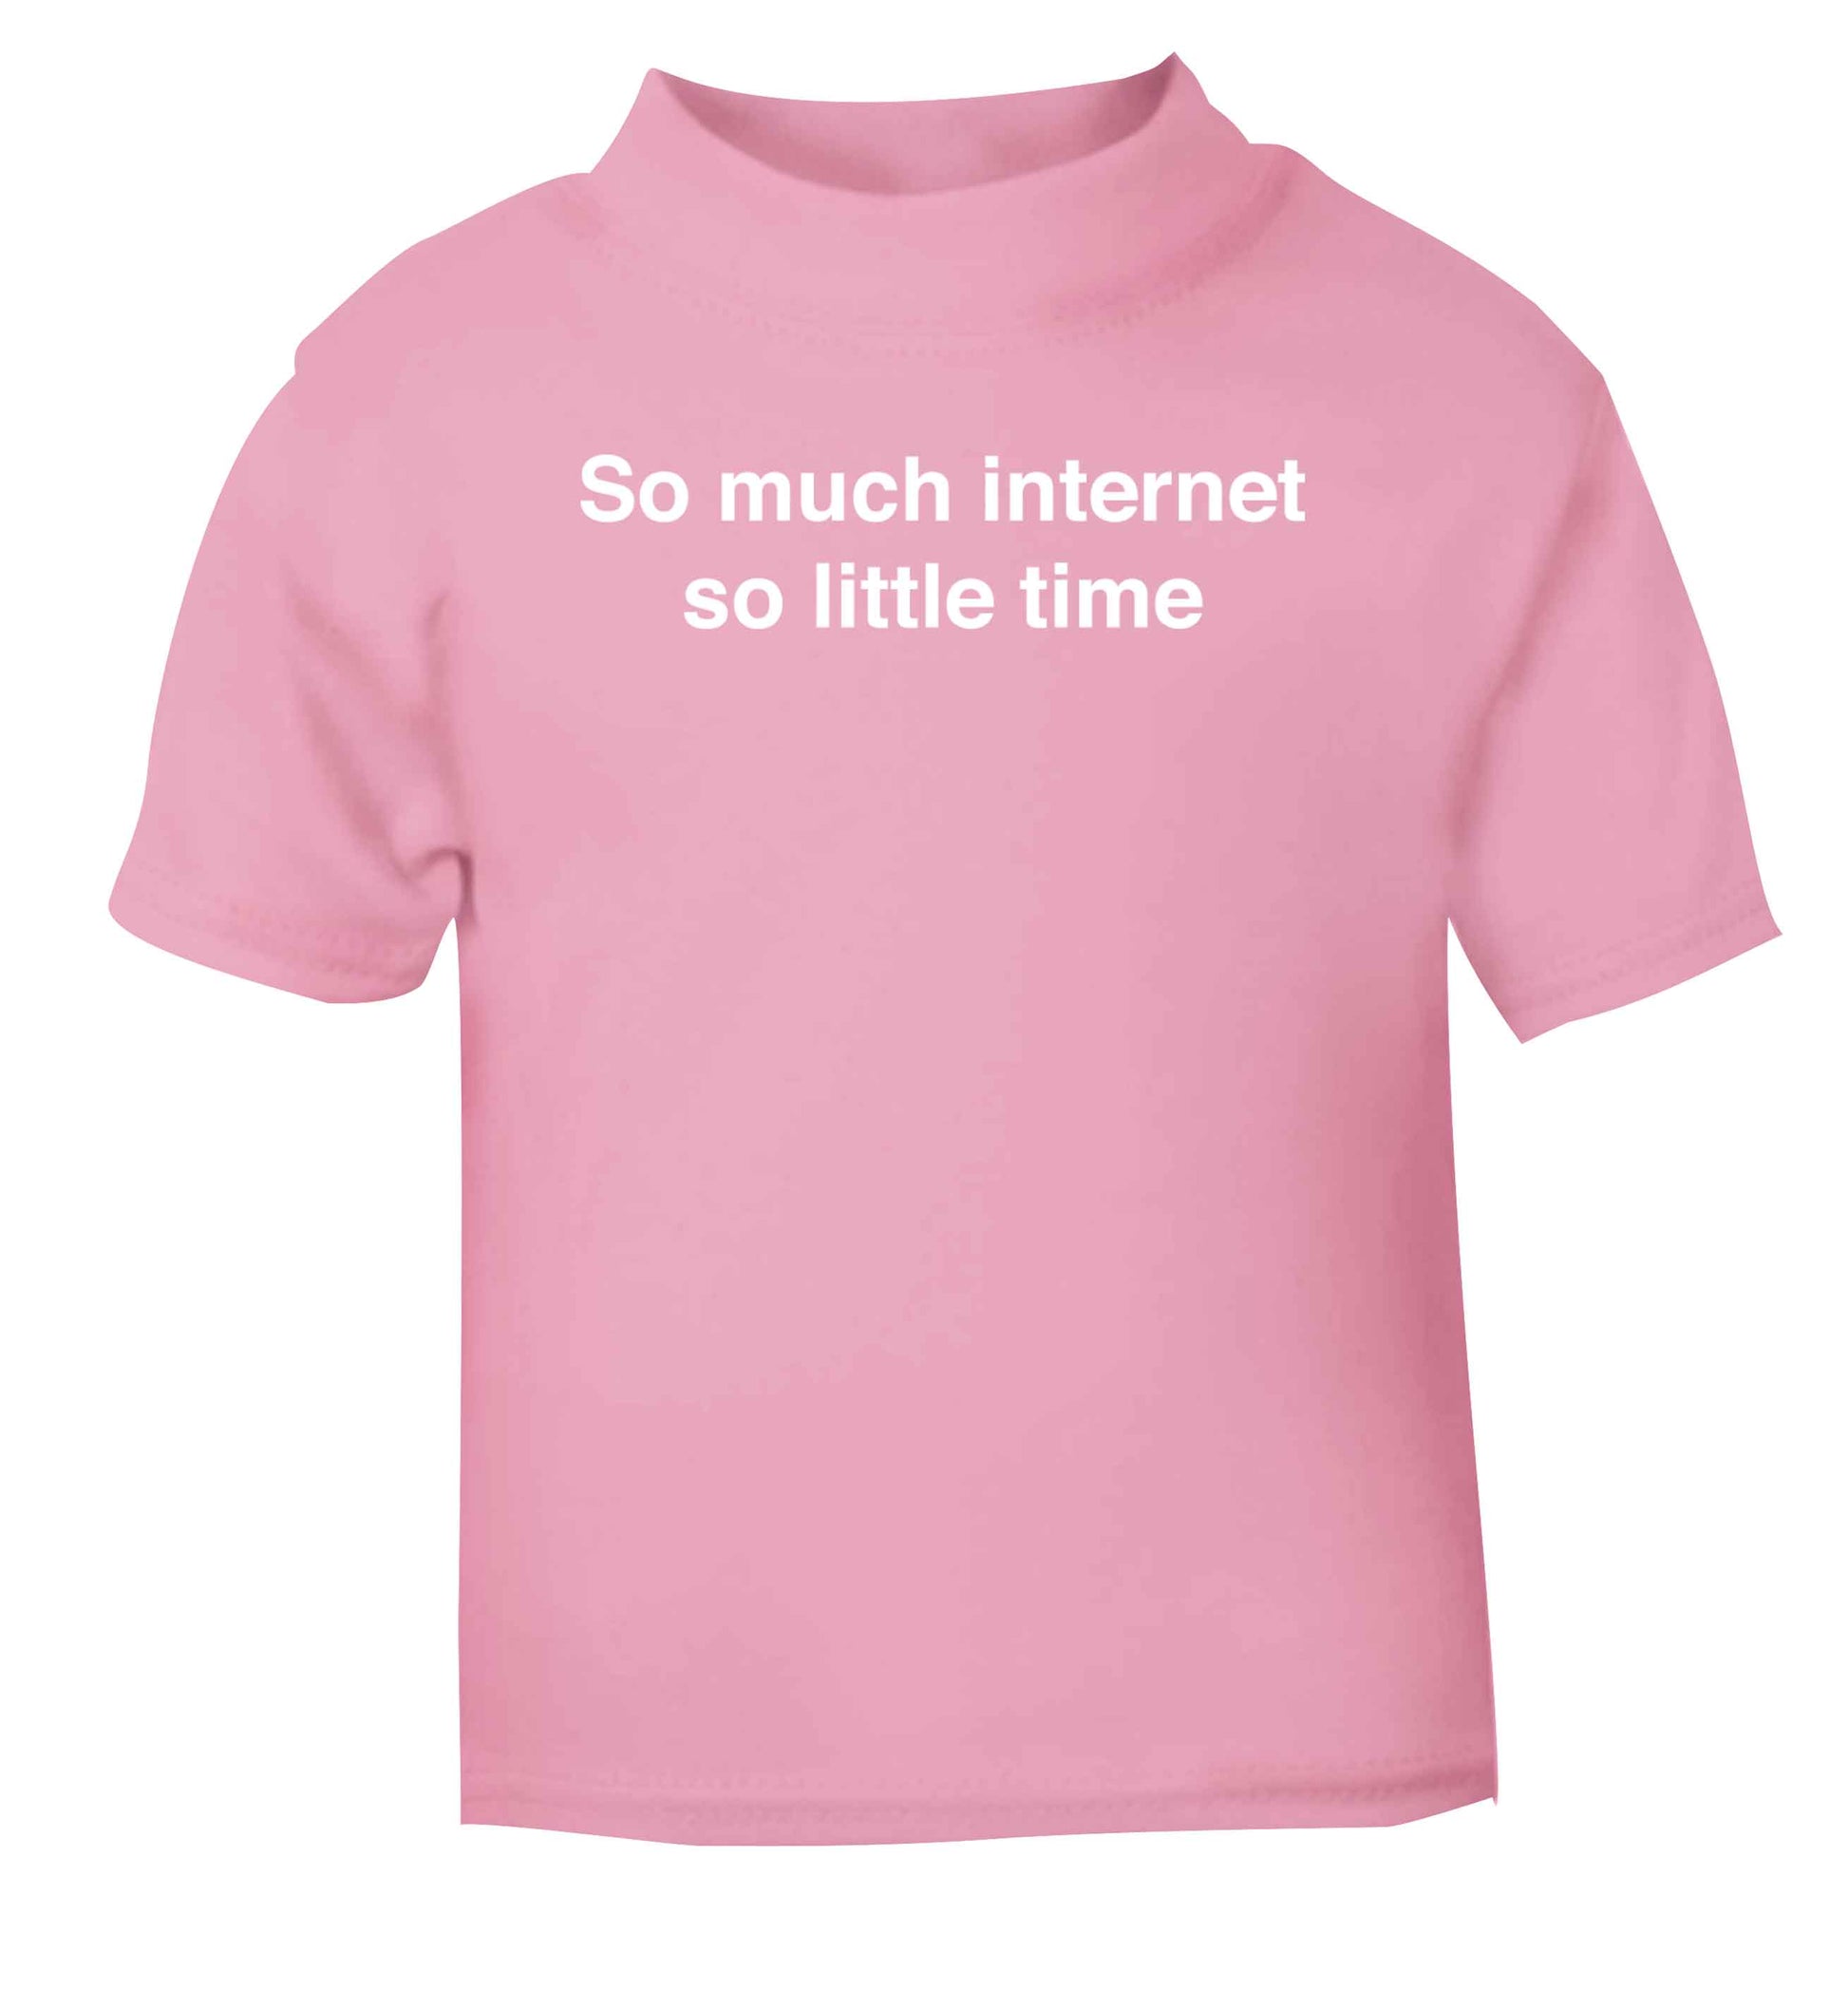 So much internet so little time light pink baby toddler Tshirt 2 Years